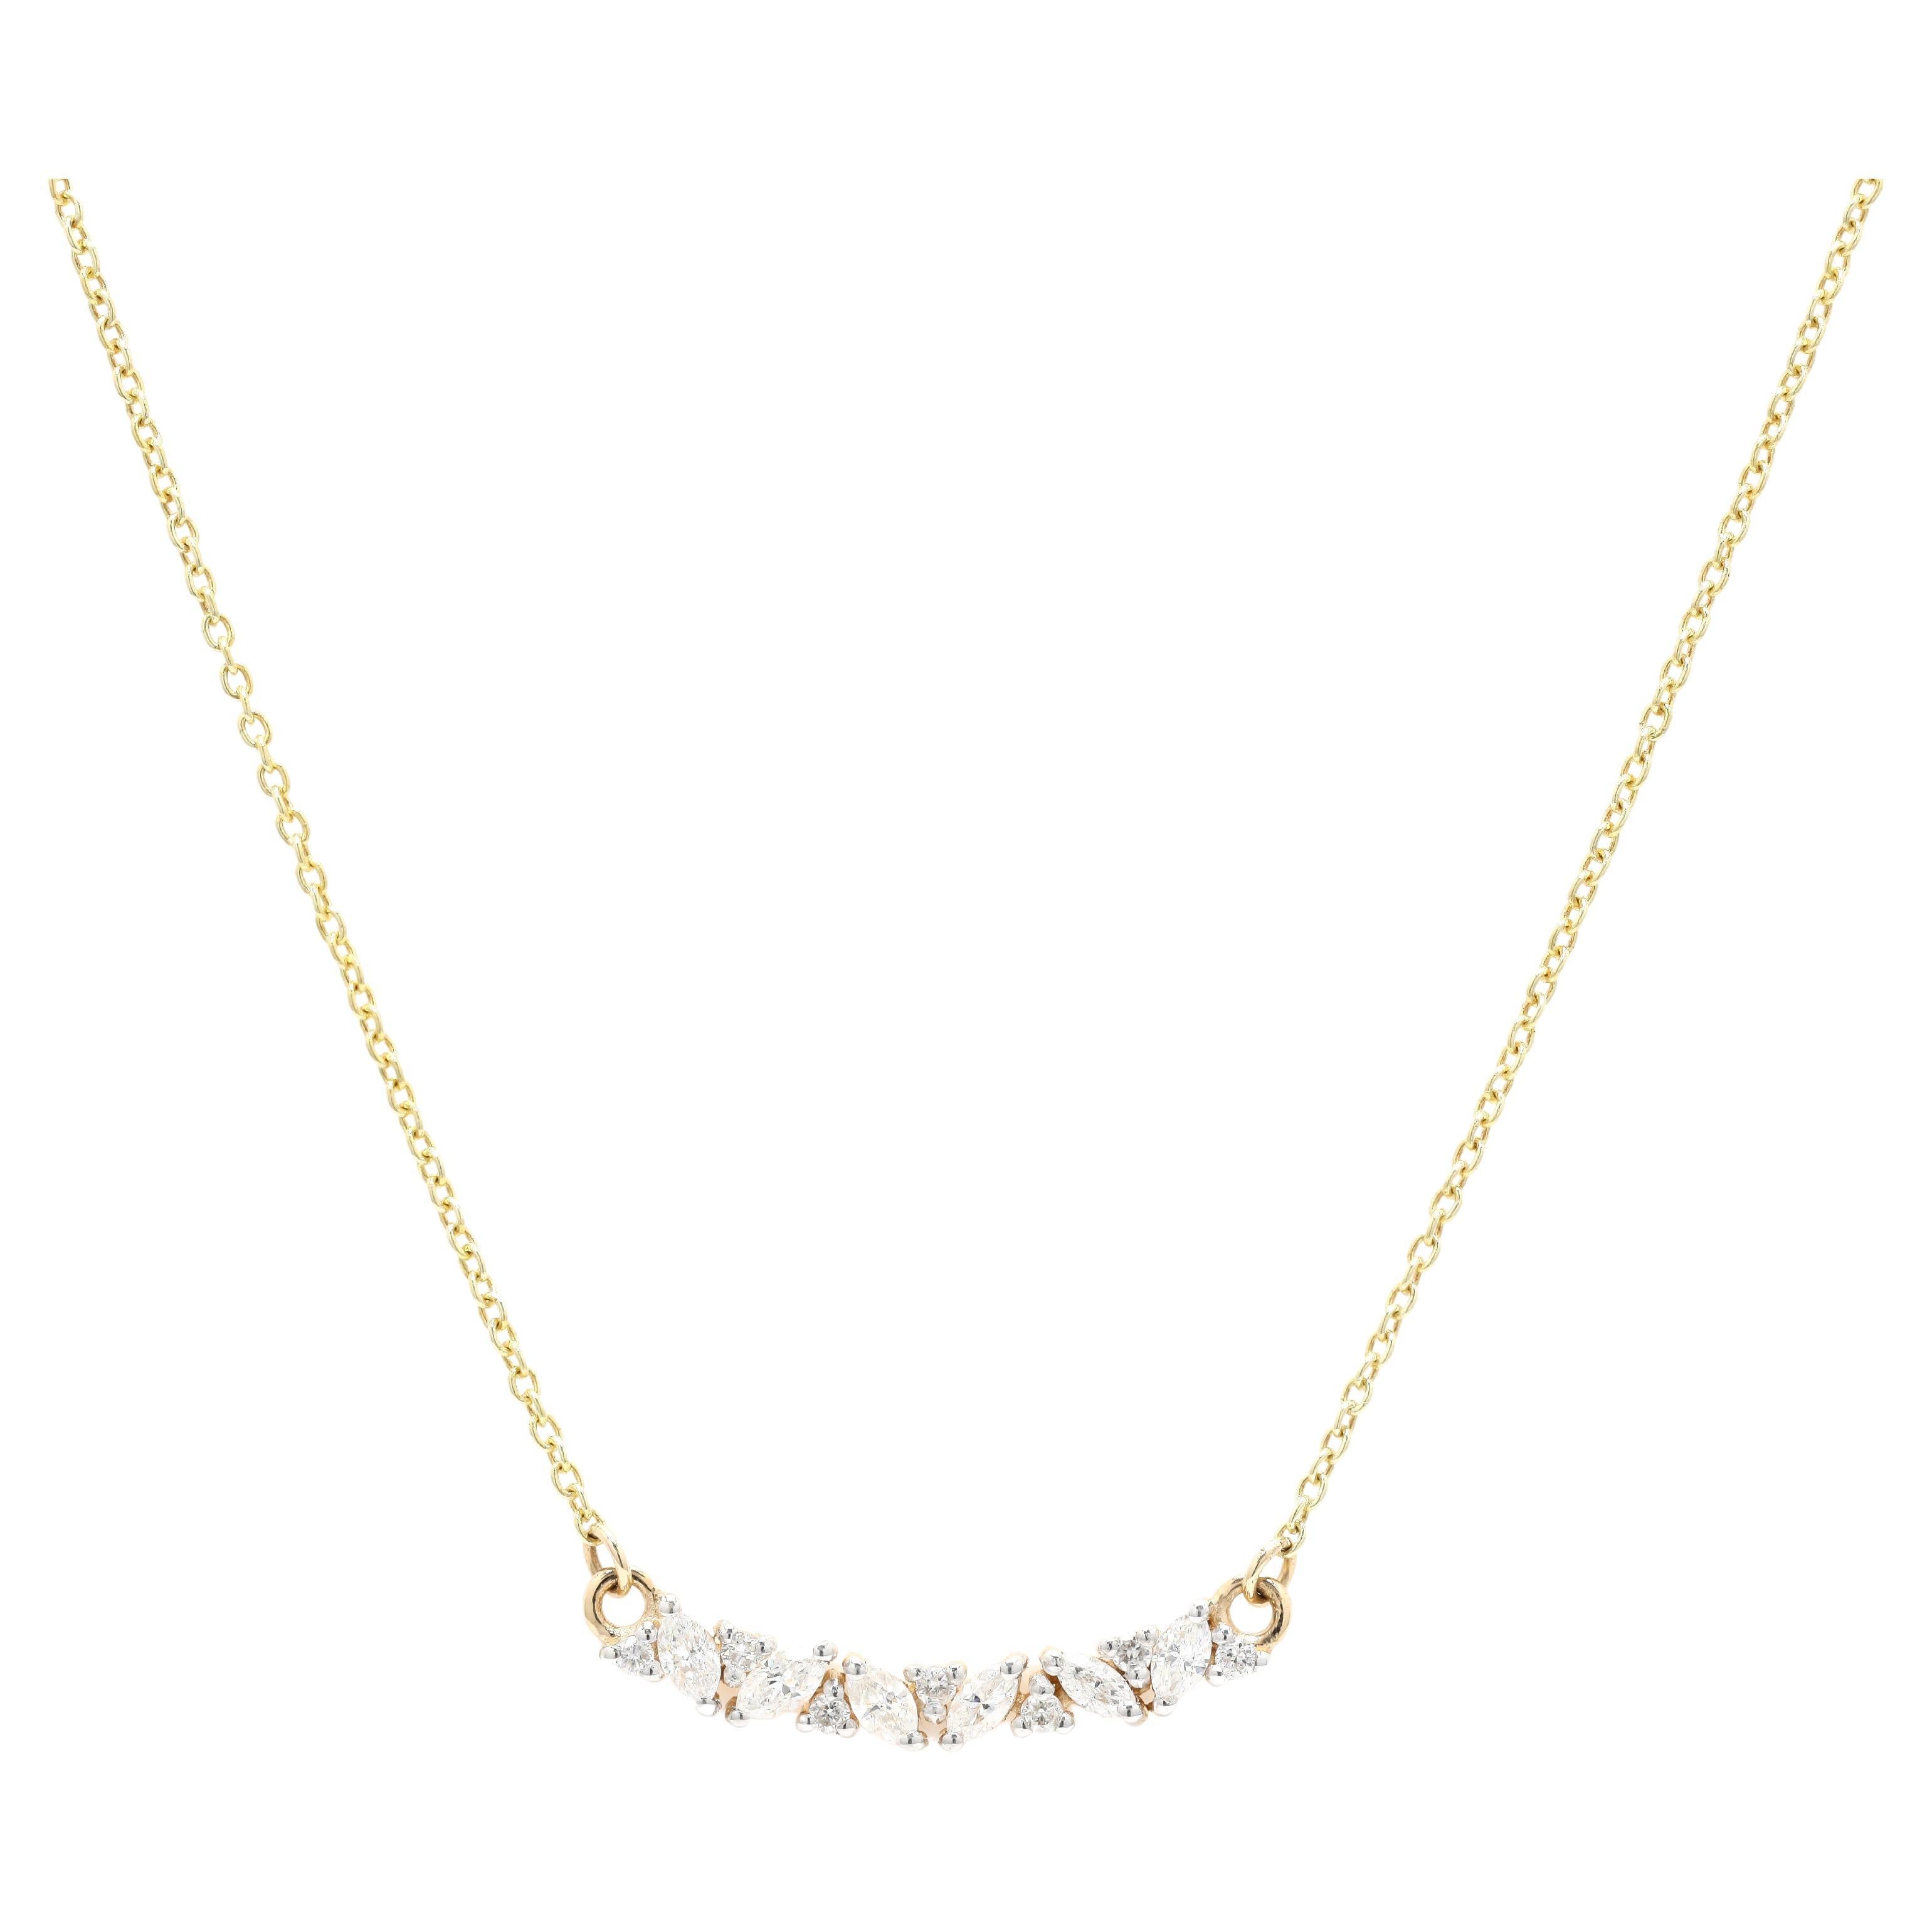 Diamond Pendant Necklace in 14K Yellow Gold 